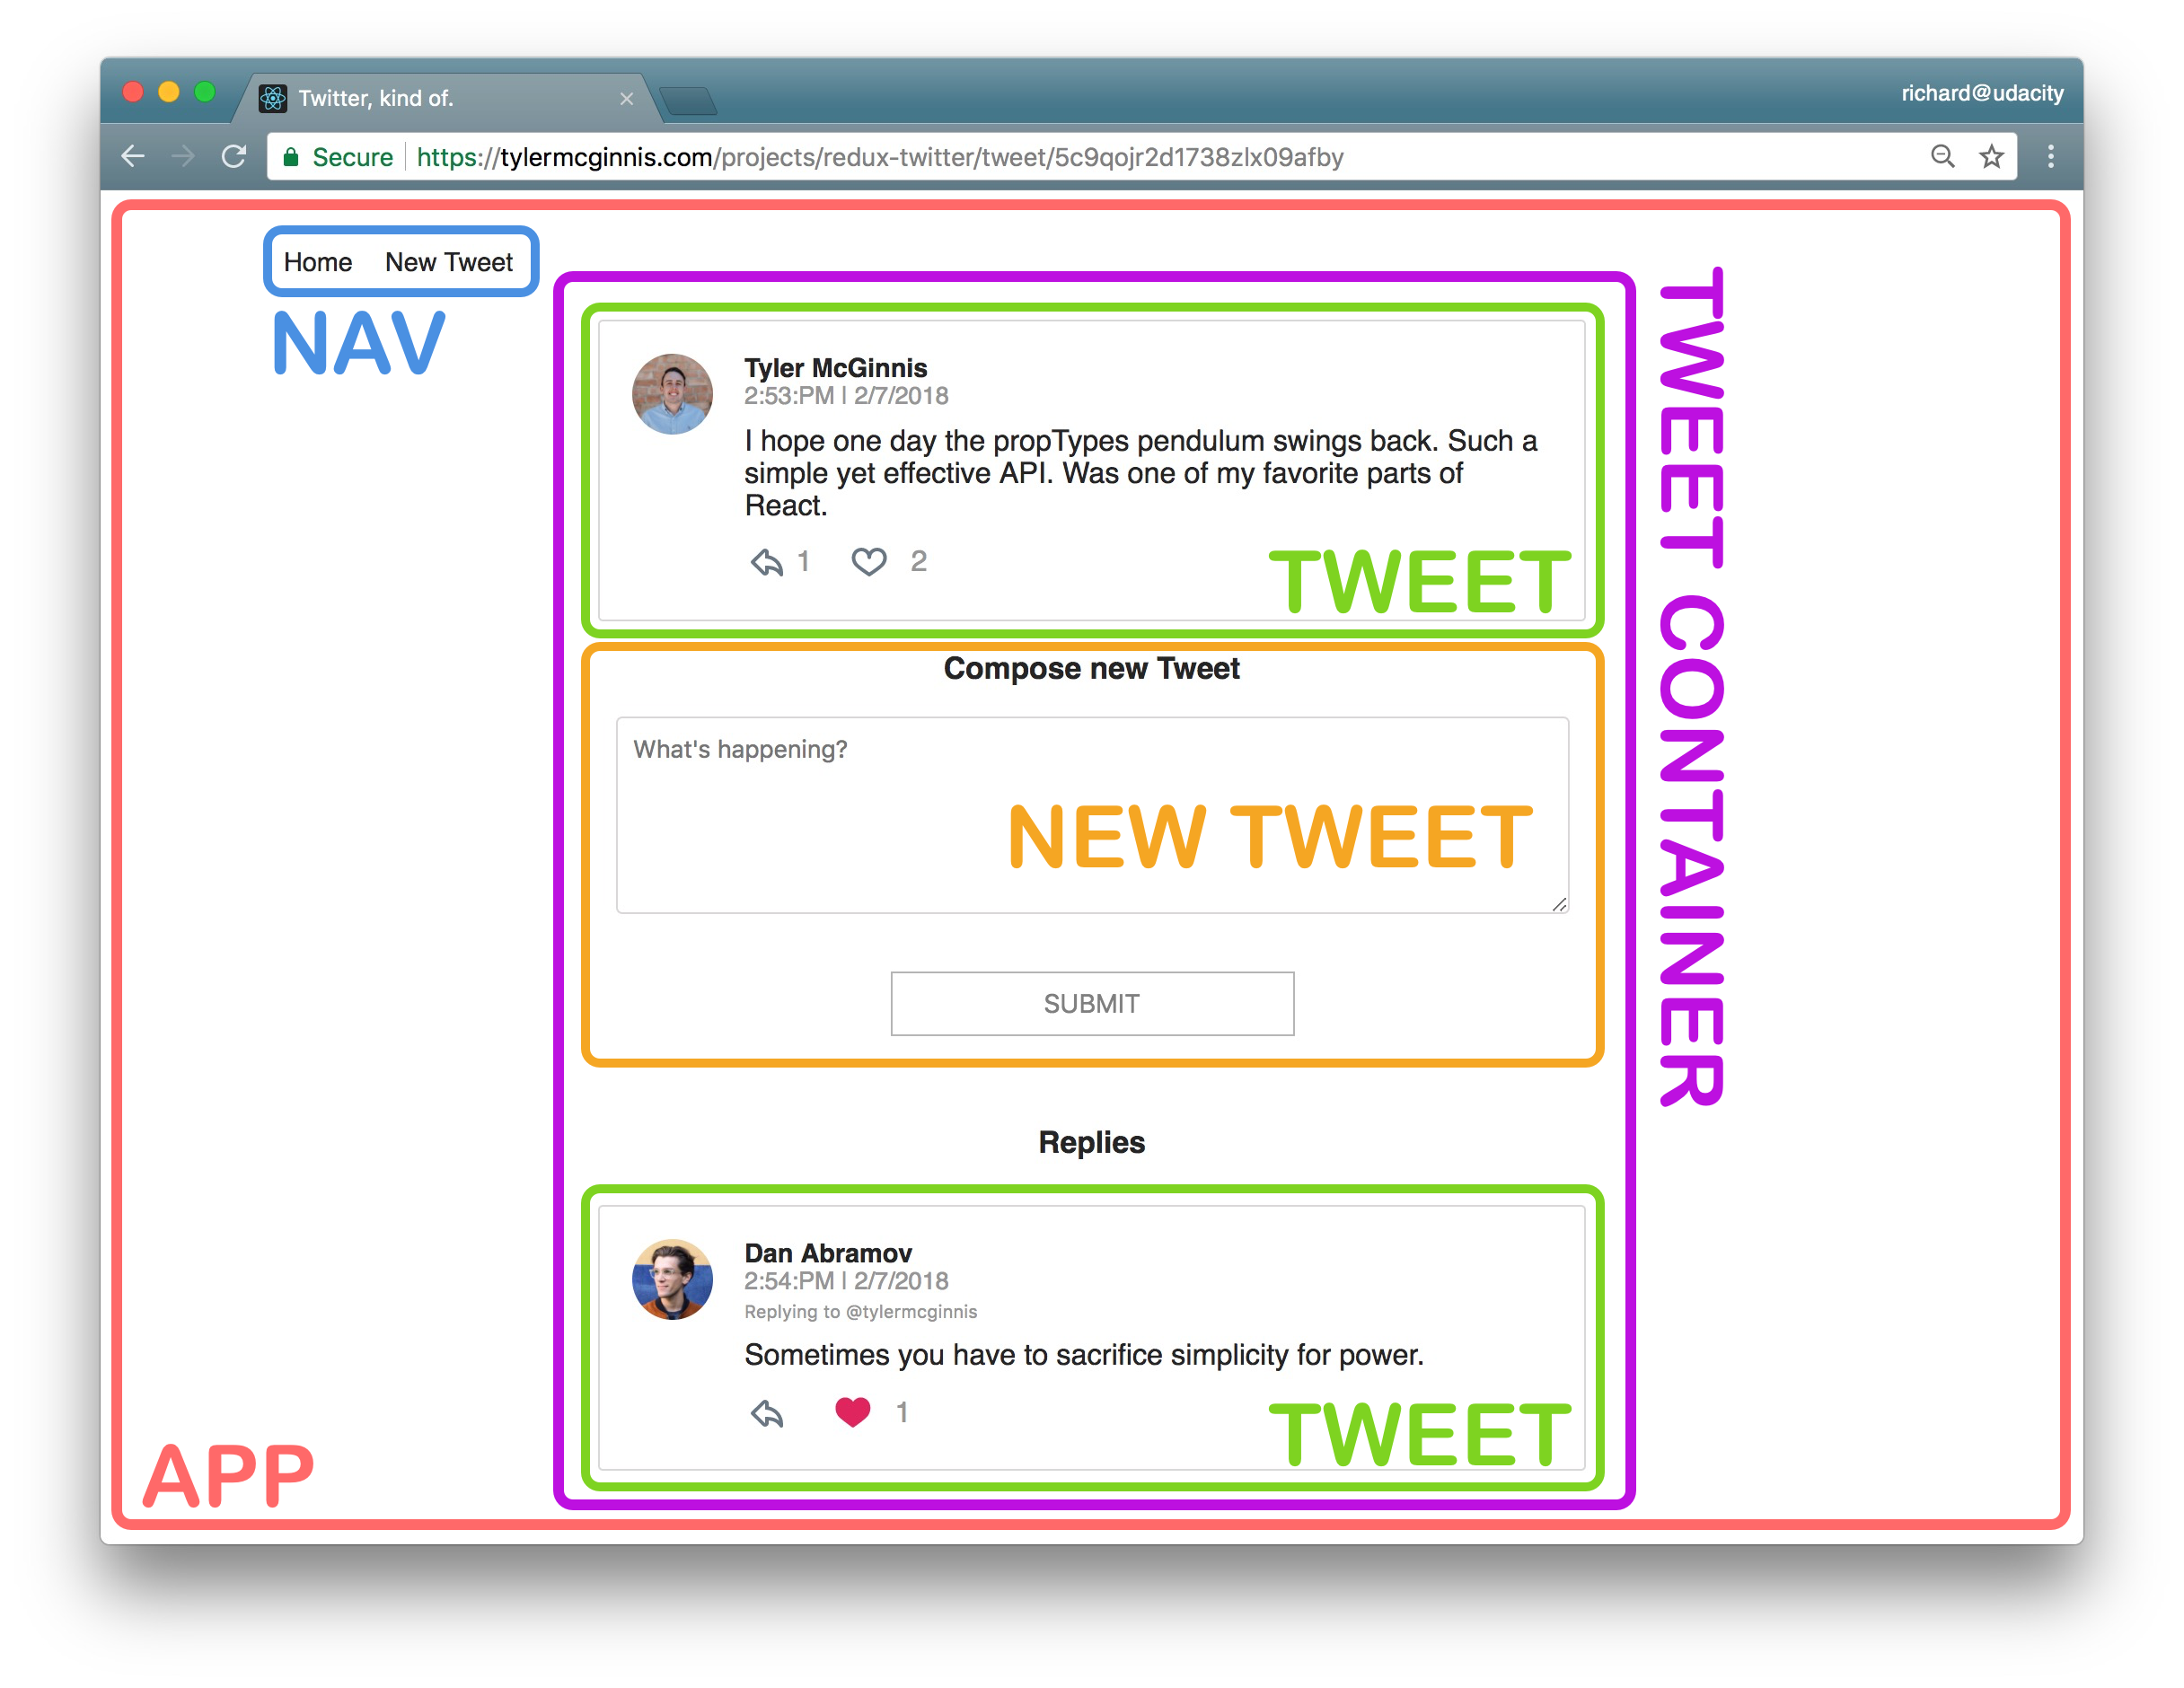 Components for the Tweet View